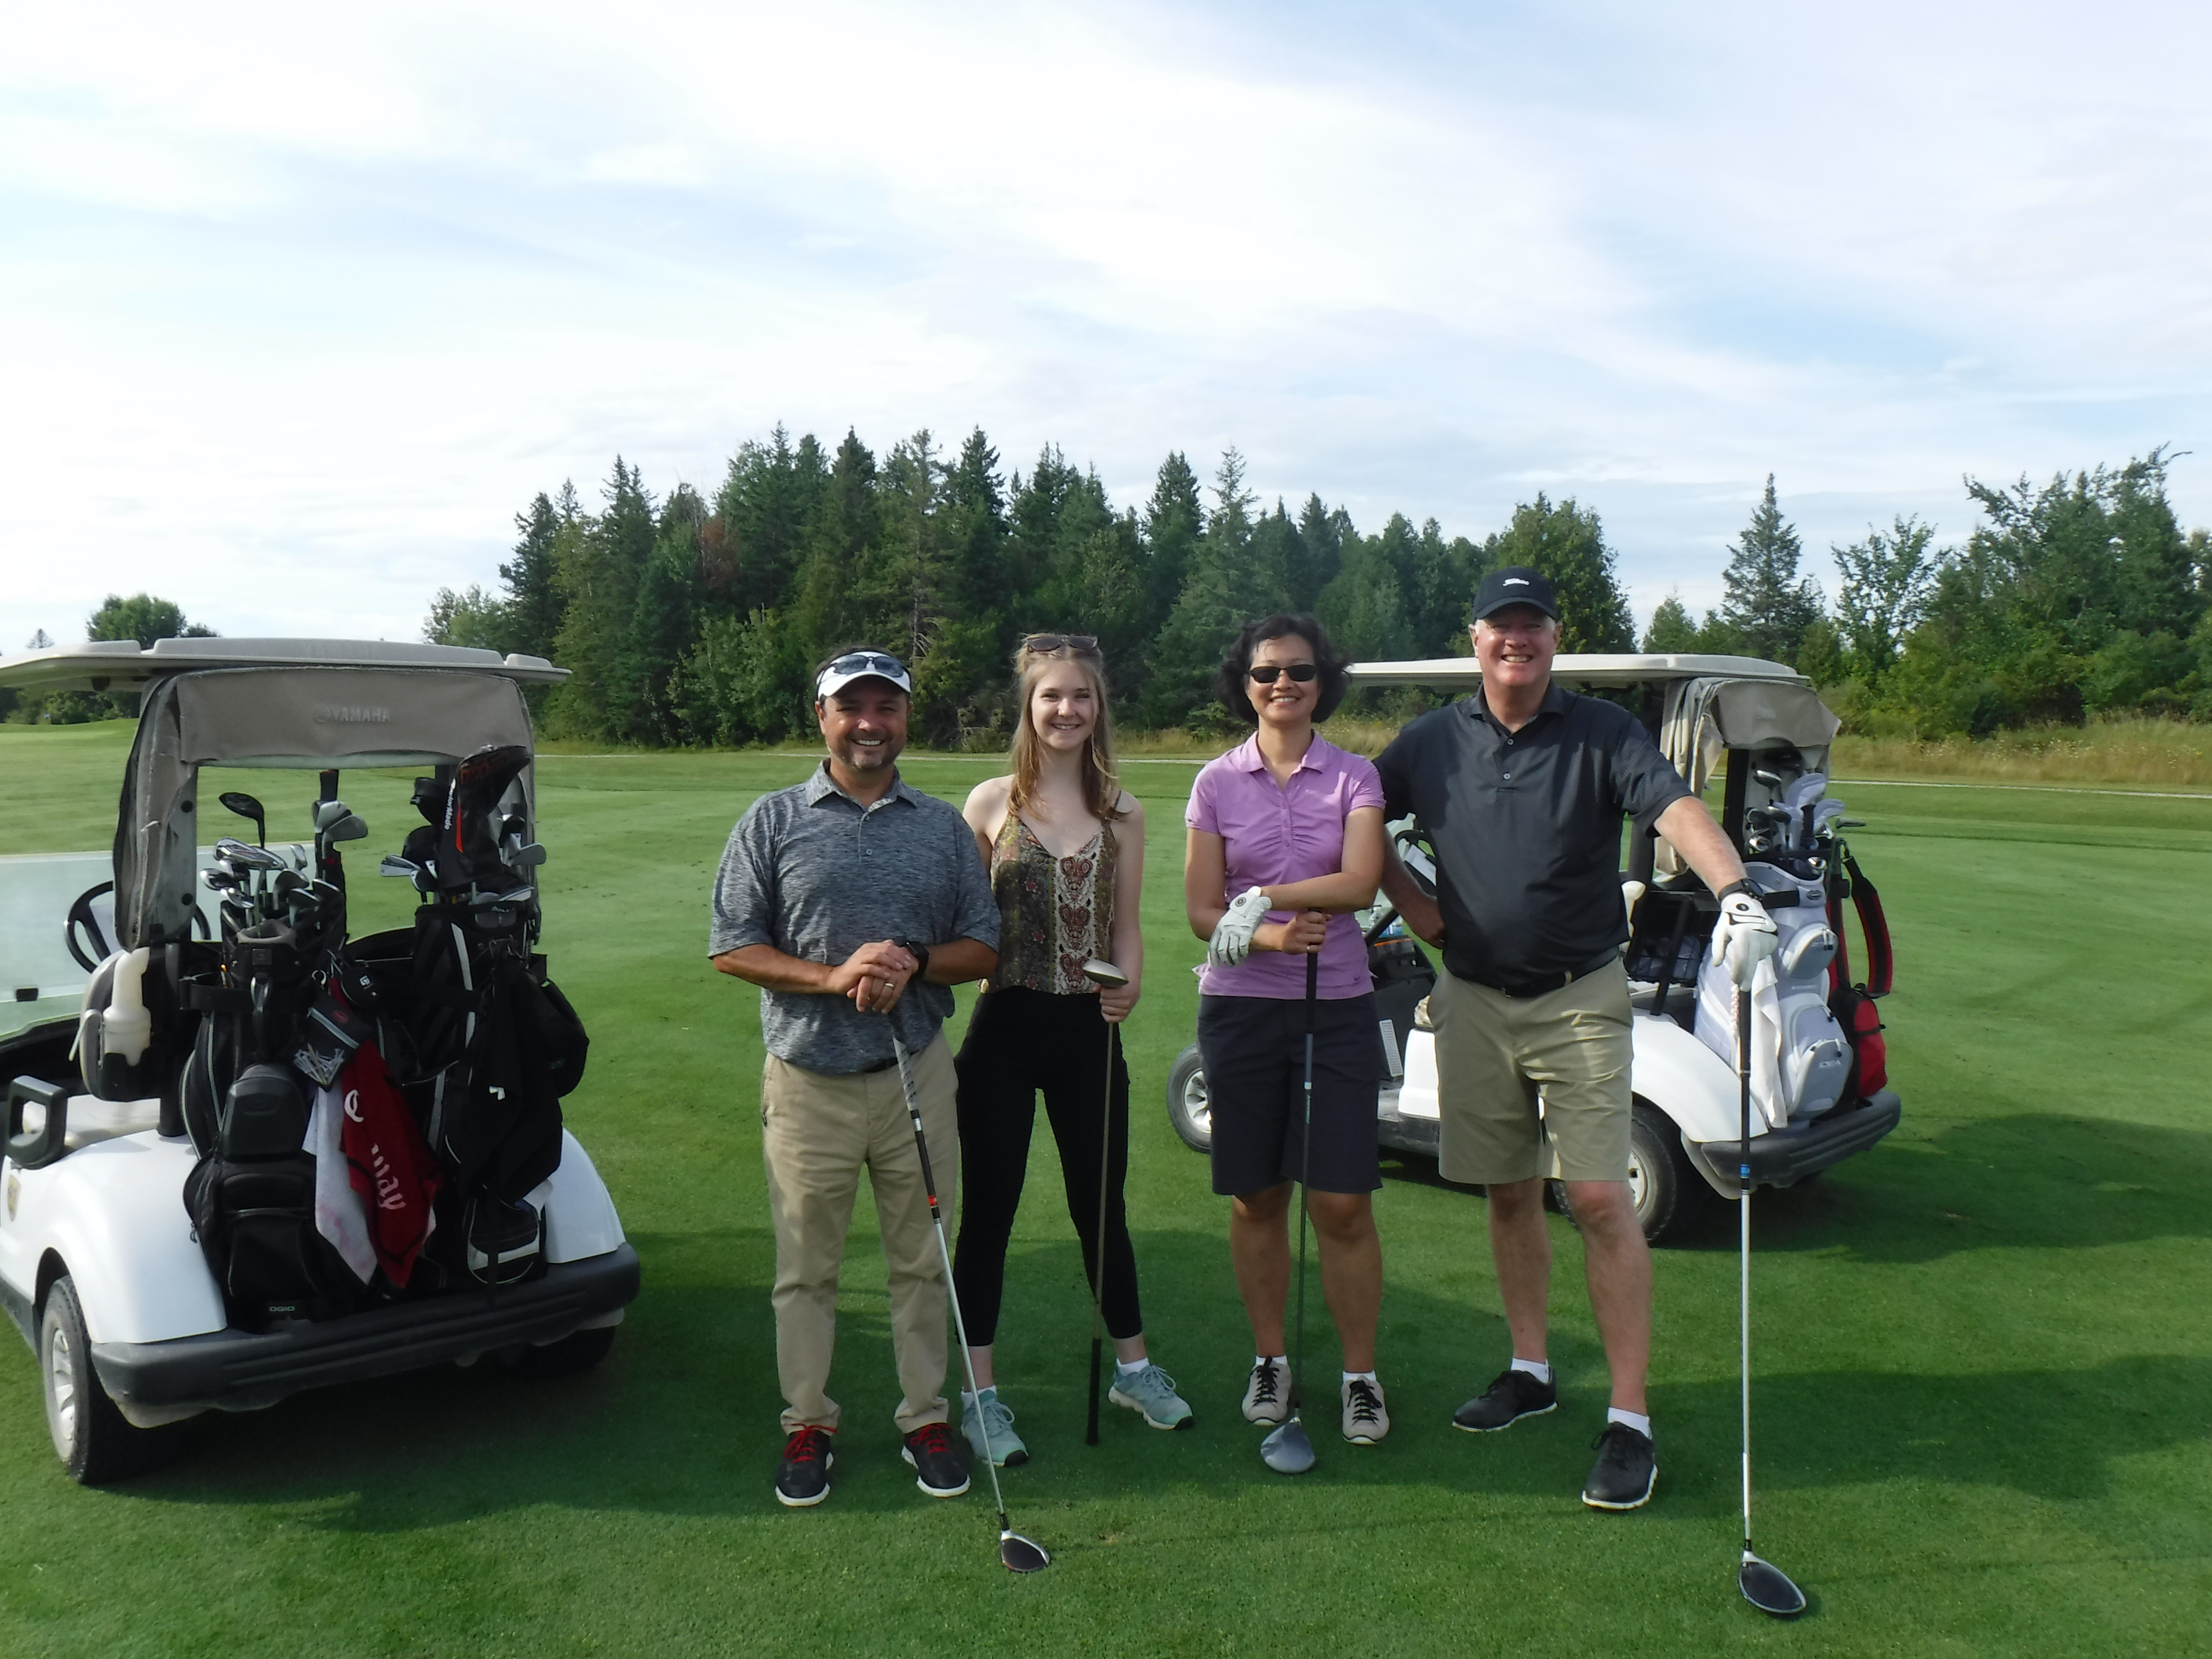 Two men and two women smiling together on golf course